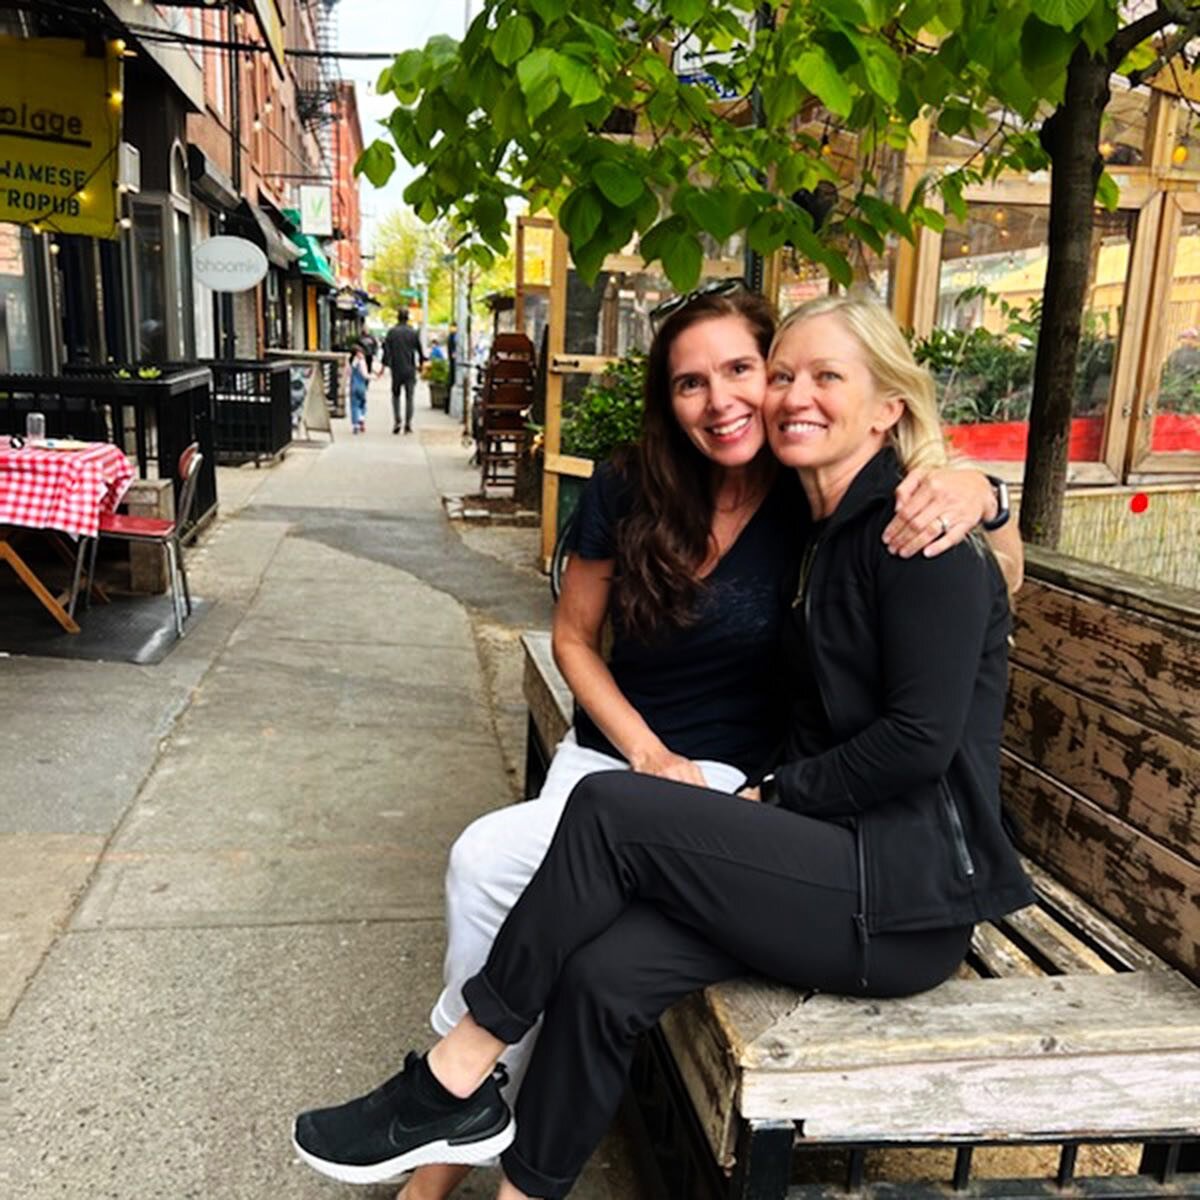 On a recent trip to NYC. Saw old friends, new friends, family, and spent the best day with @jolienovak and @alan_carroll_studio !
.
.
.
#manhattan #newyorkcity #brooklyn #sundaybrunch #oldfriendsarethebestfriends